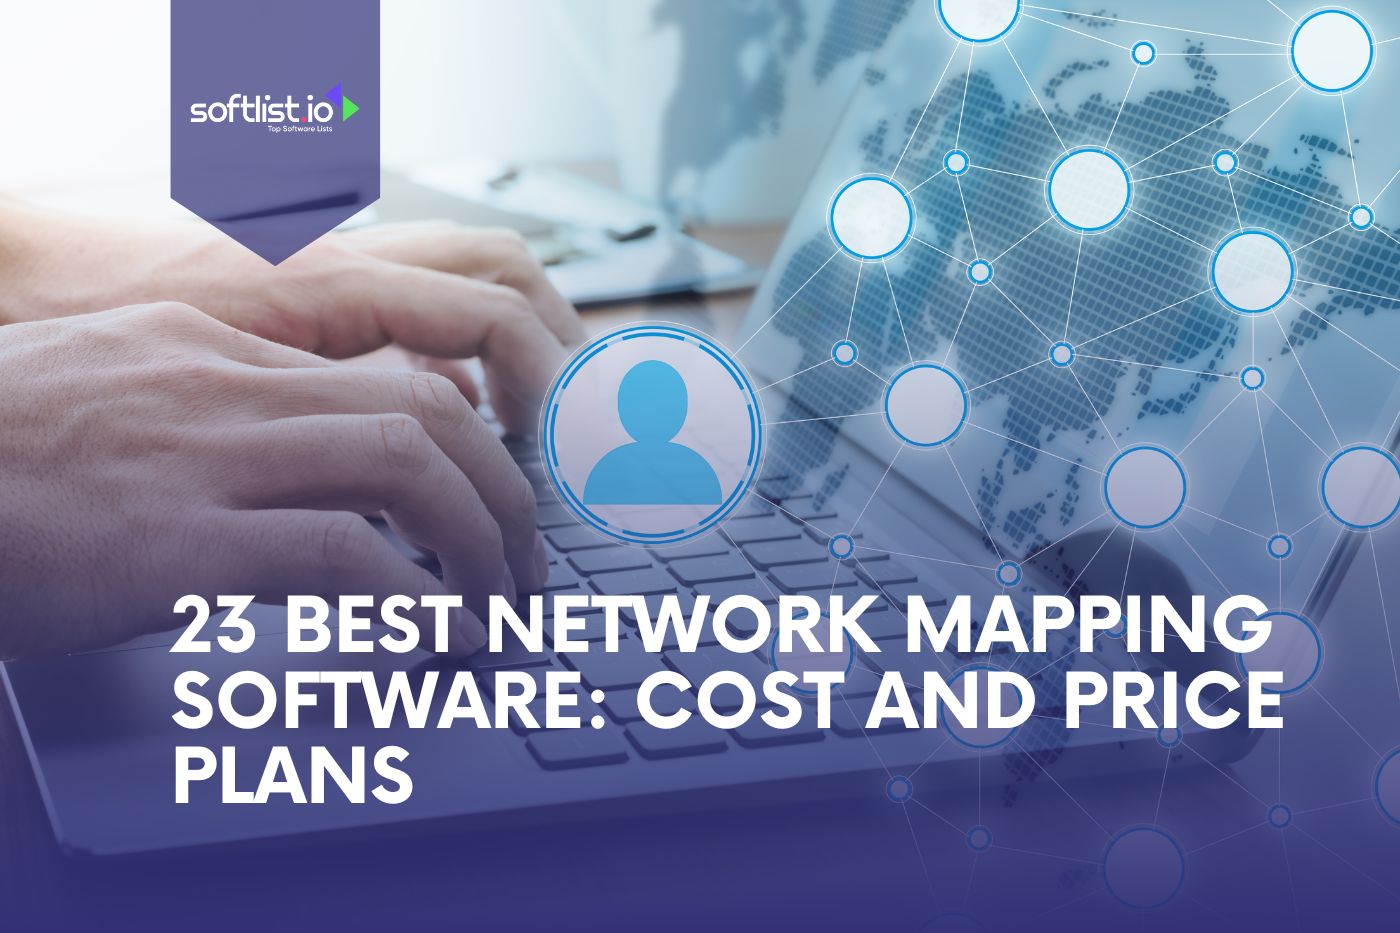 23 Best Network Mapping Software Cost and Price Plans